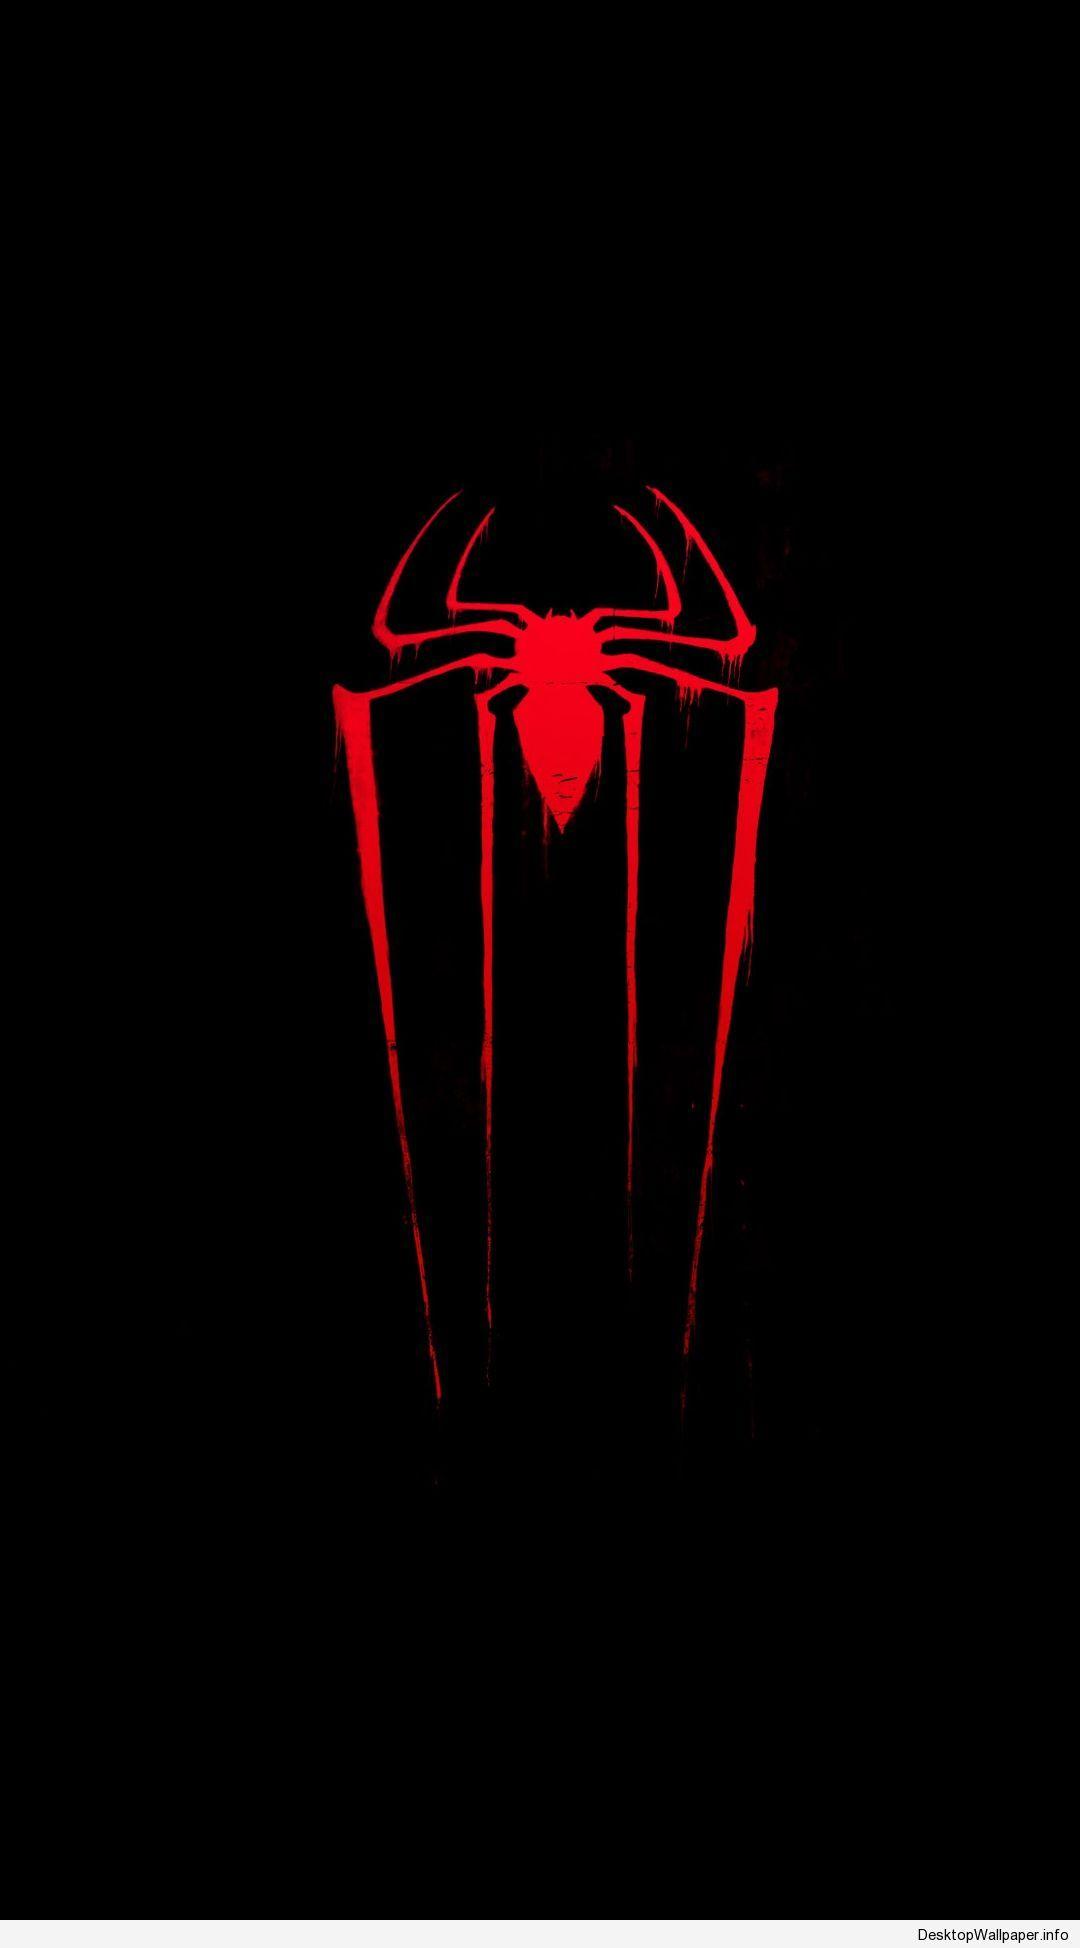 Spiderman For Android Wallpapers